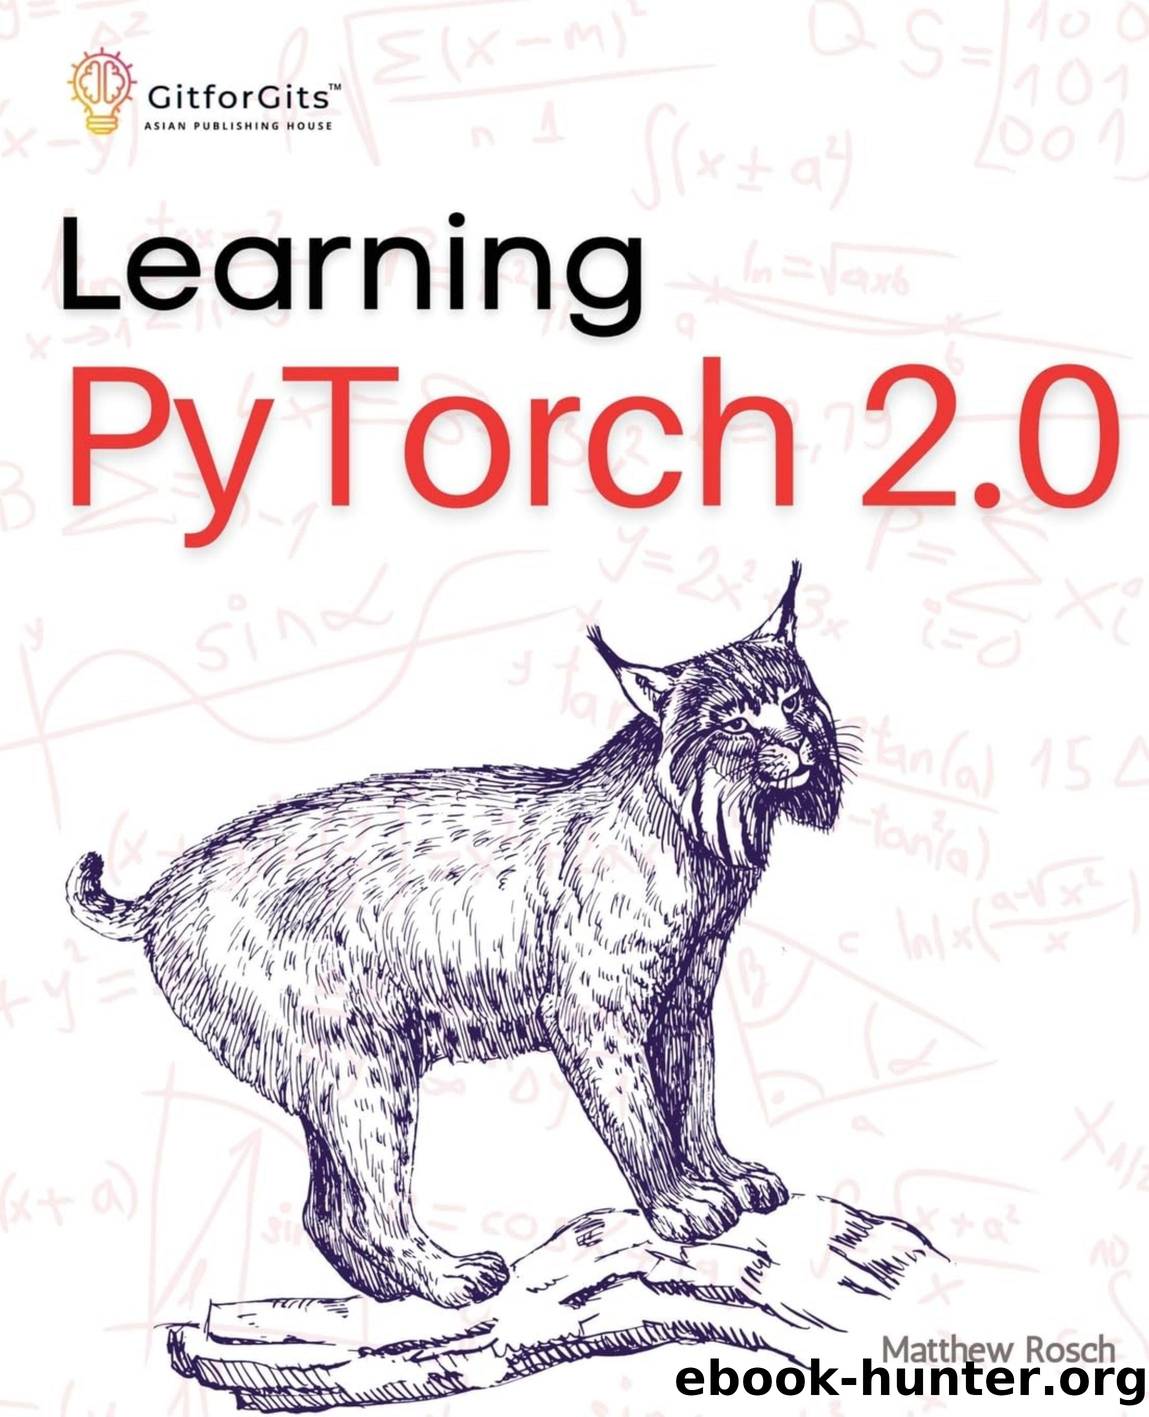 Learning PyTorch 2.0: Experiment Deep Learning from basics to complex models using every potential capability by Matthew Rosch